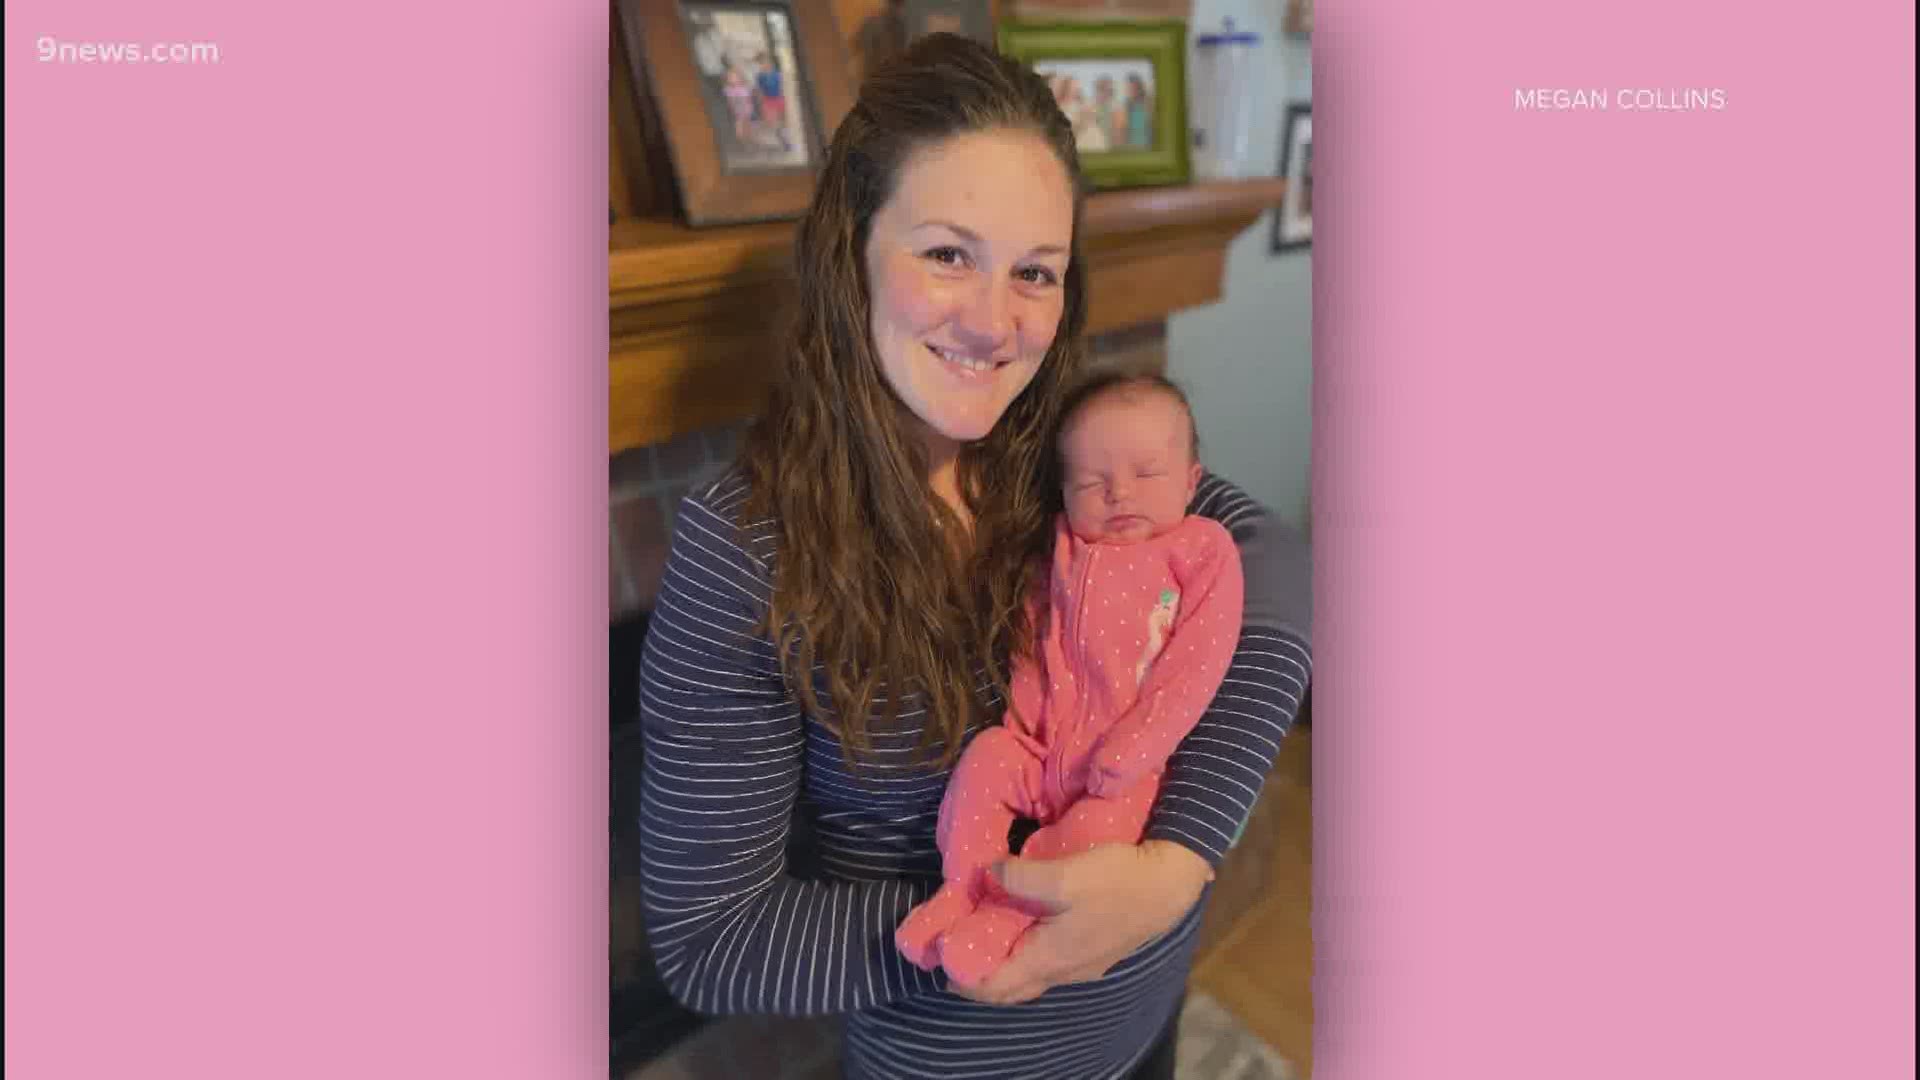 We met Megan Collins last week when she was nervous she would deliver during the massive snow storm. Baby Wesley was born early Sunday morning.